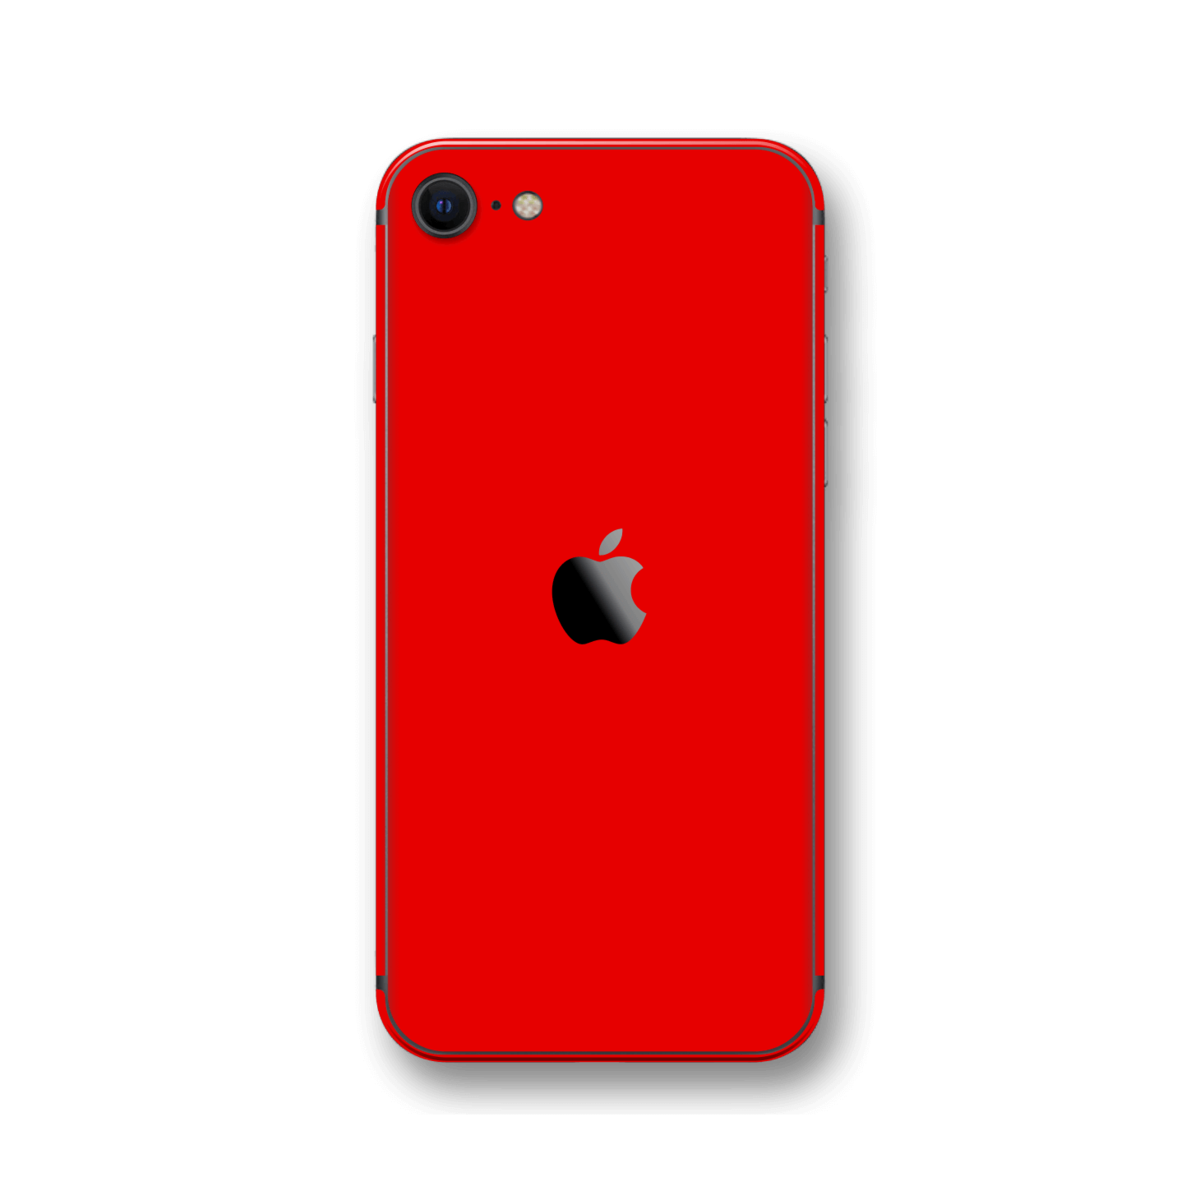 iPhone SE 64Gb Product Red freeshipping - iStore Costa Rica